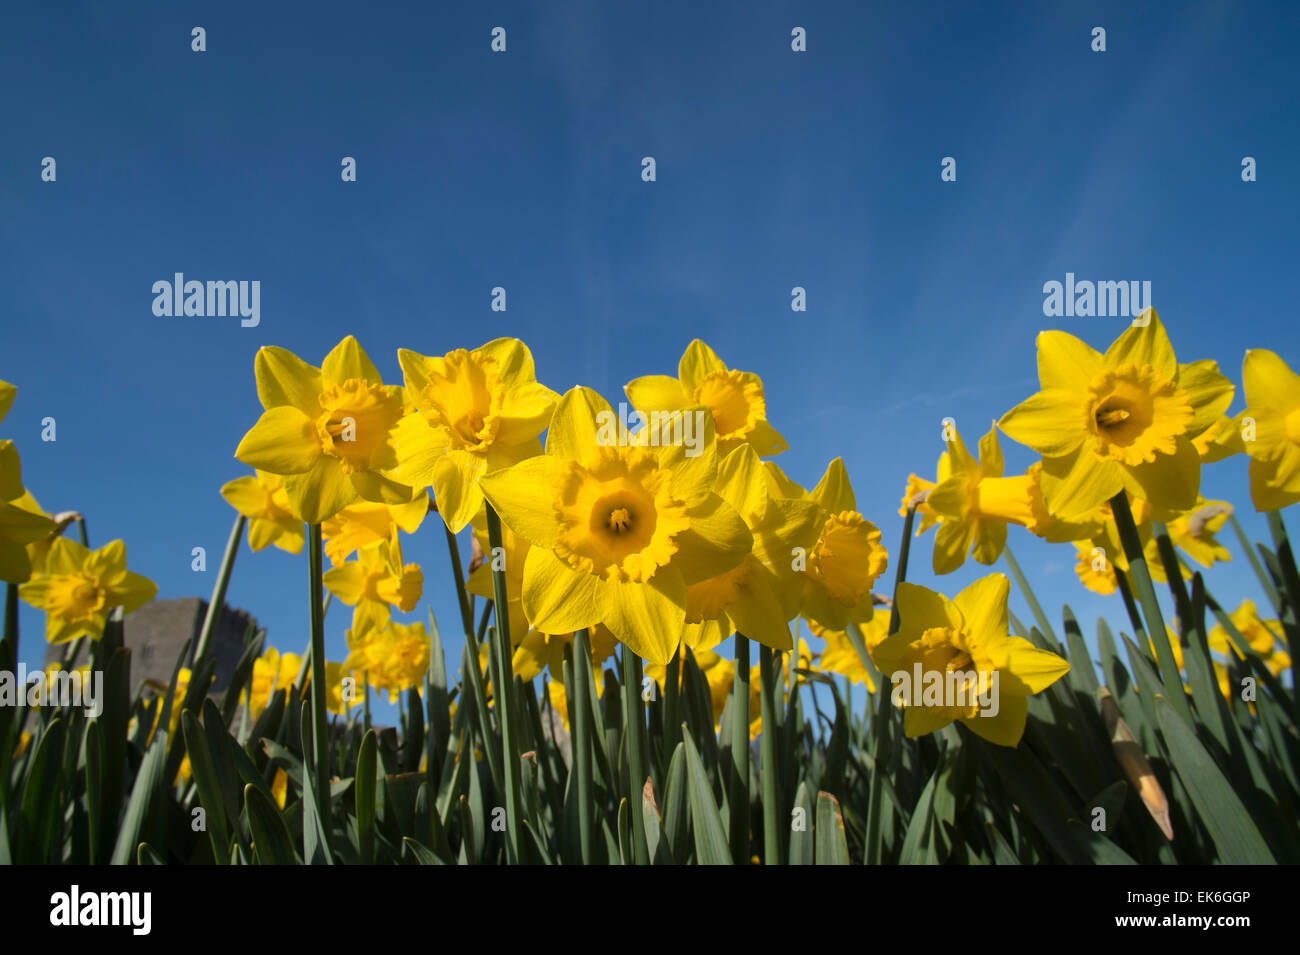 Spring Daffodils in bloom Stock Photo - Alamy